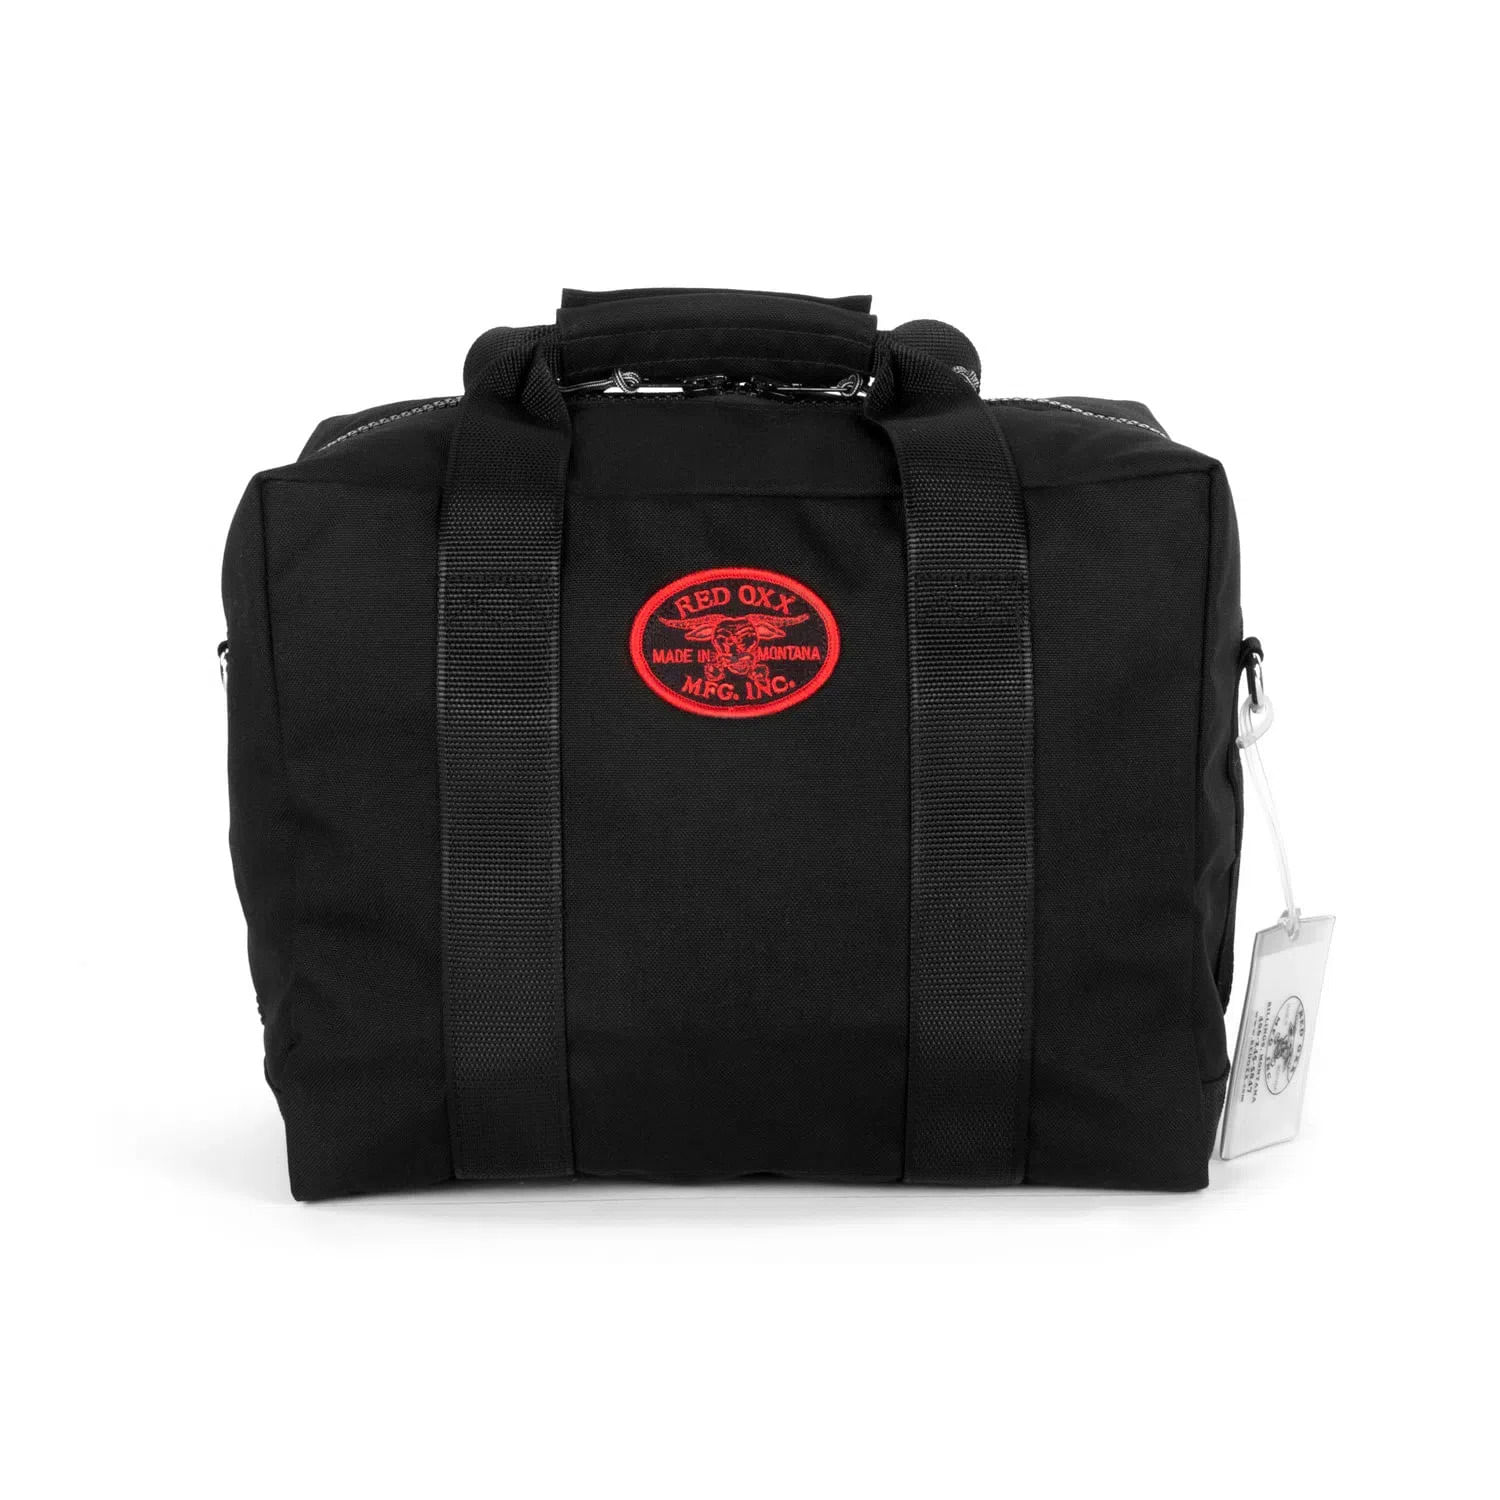 Extra-Small Aviator Kit Bag | Duffel Bag - Red Oxx - Quality Soft Sided  Luggage for your Spirit of Adventure